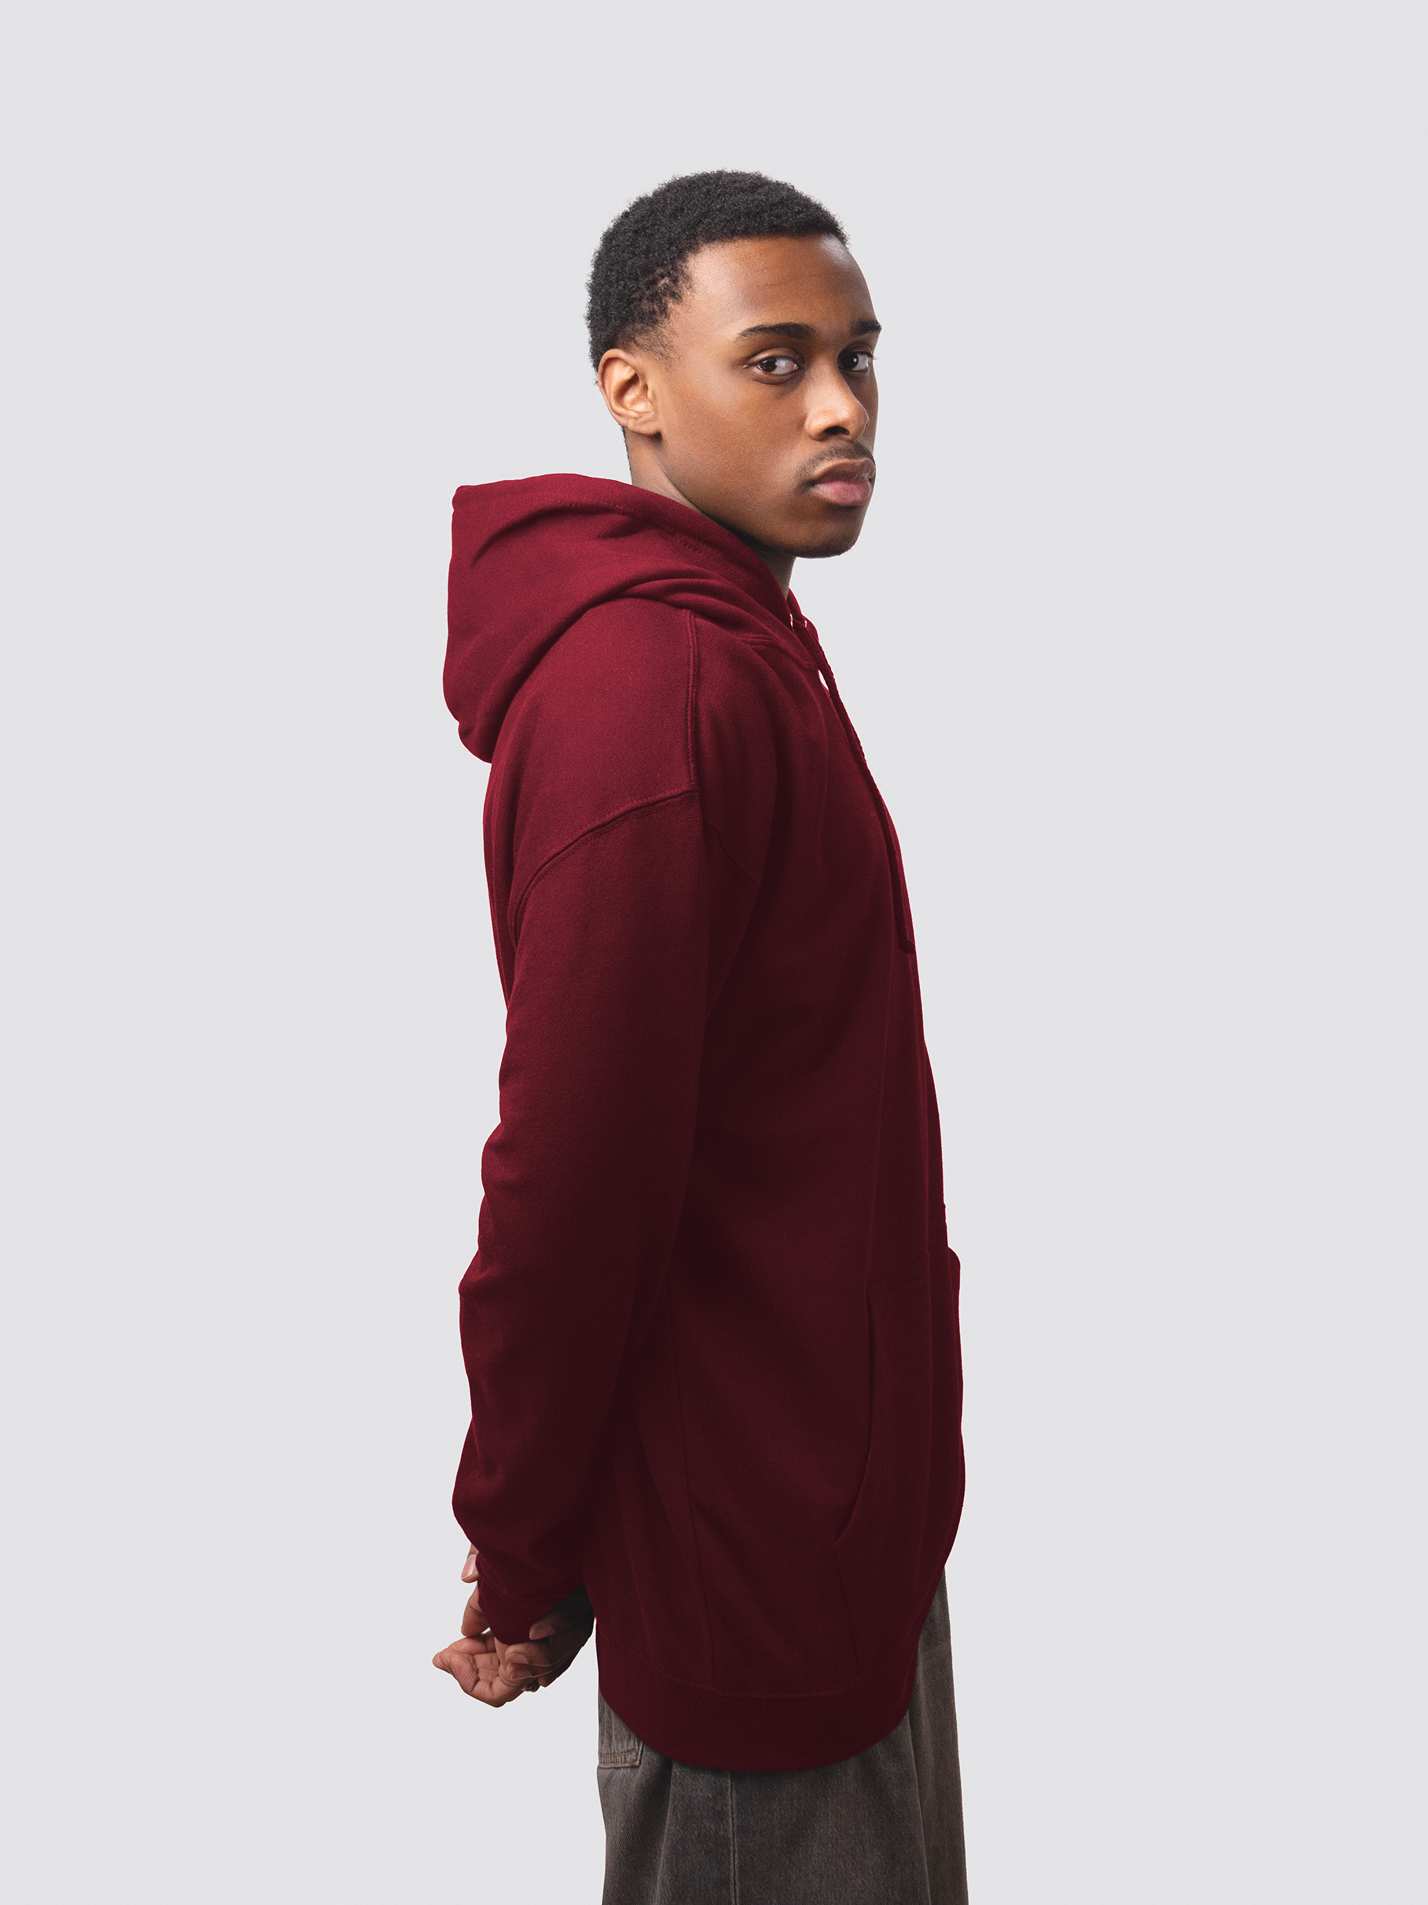 Reuben College hoodie, made from burgundy cotton-faced fabric